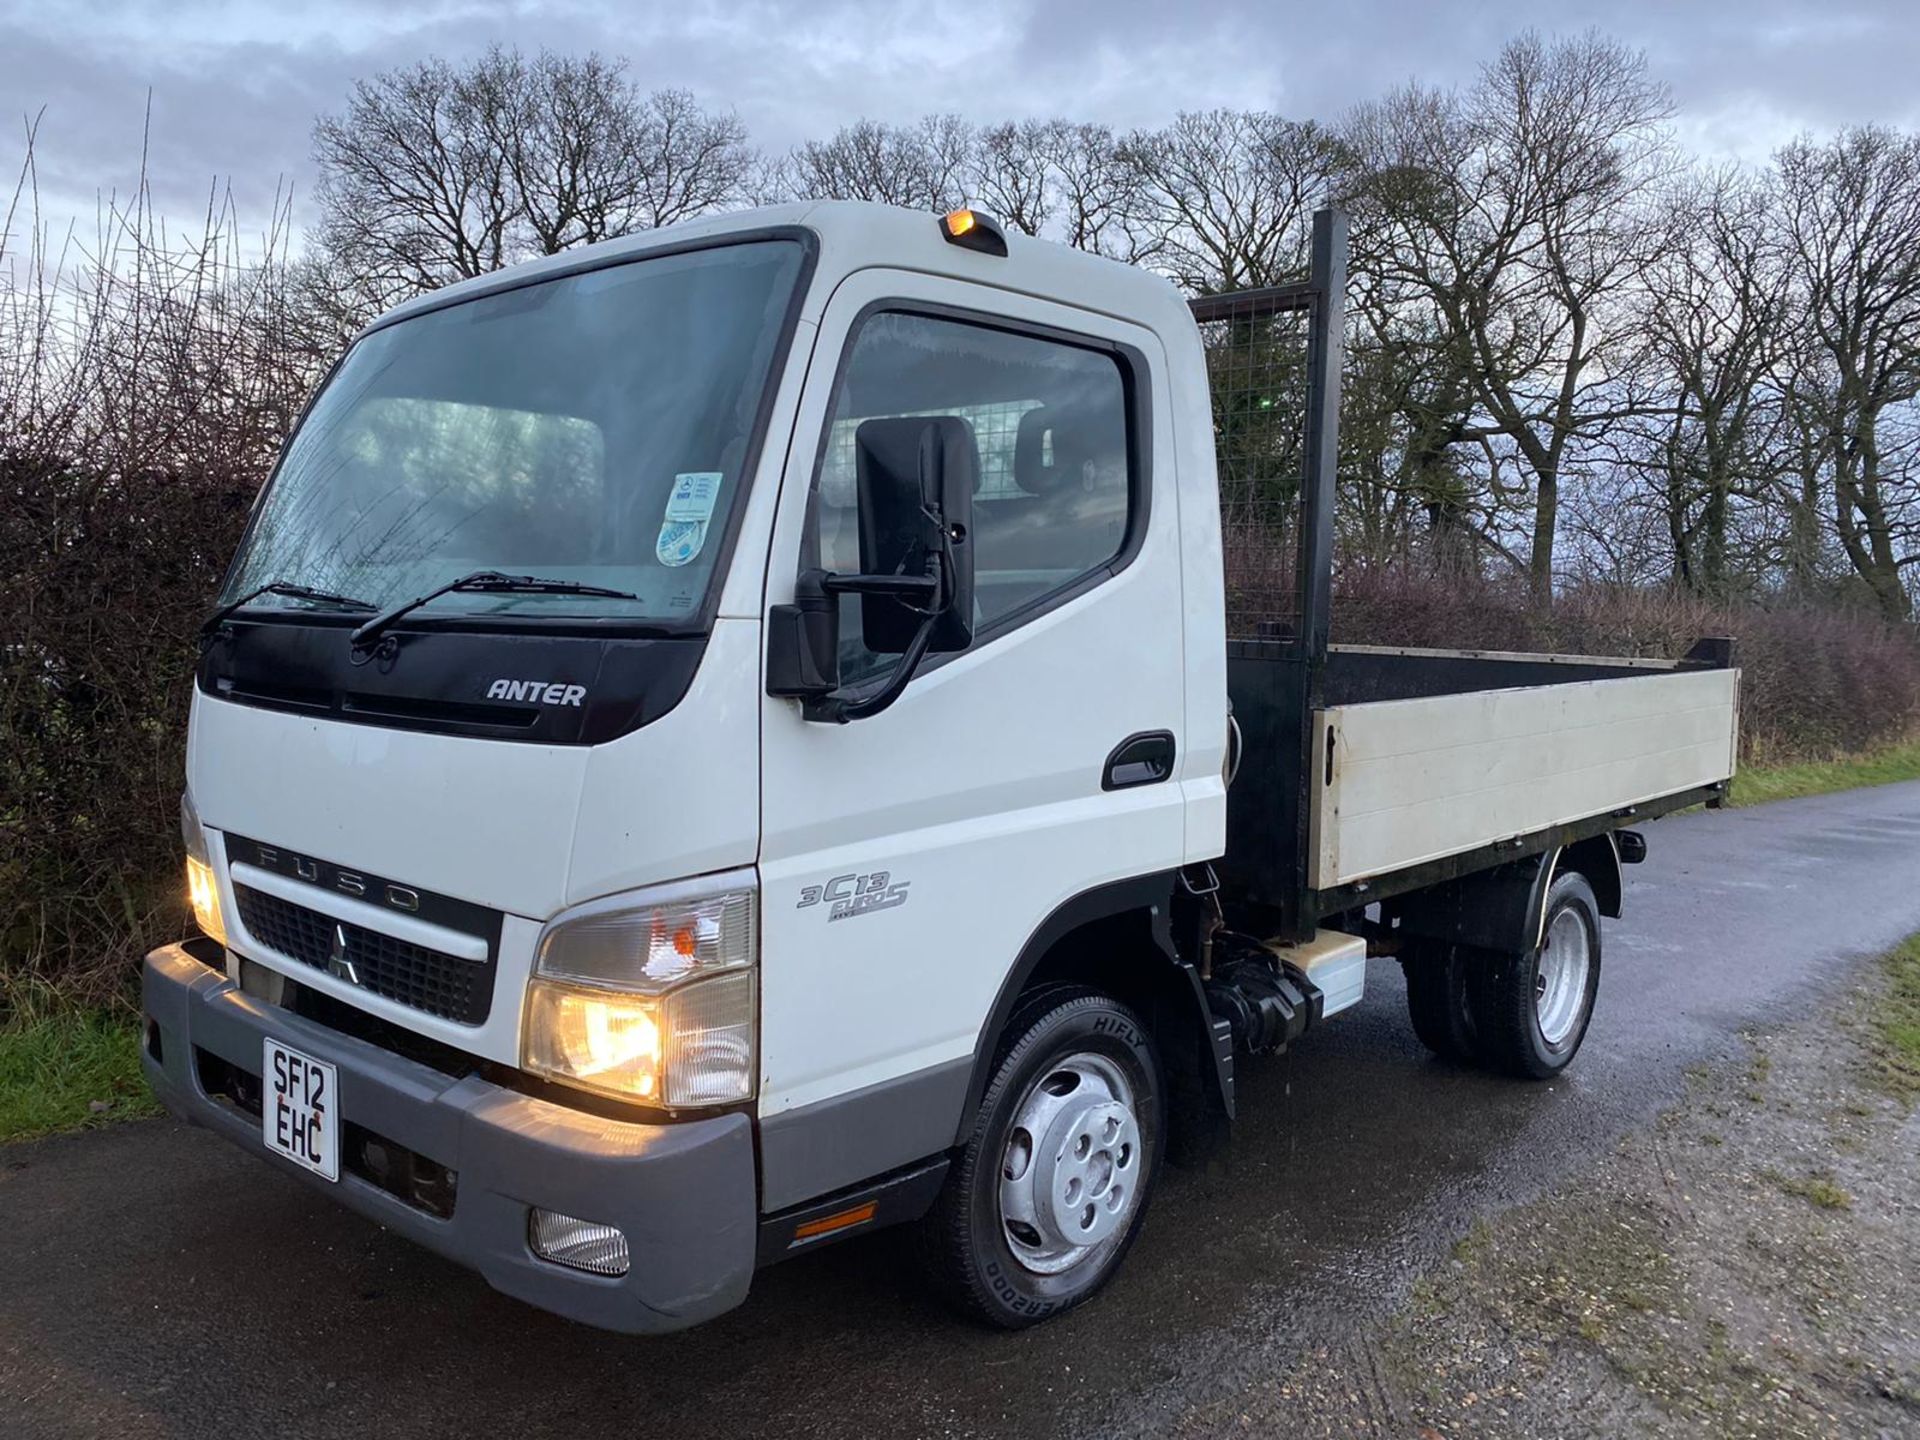 2012/12 REG MITSUBISHI FUSO CANTER 3C13-25 SWB 3.0 DIESEL WHITE TIPPER, SHOWING 0 FORMER KEEPERS - Image 3 of 10